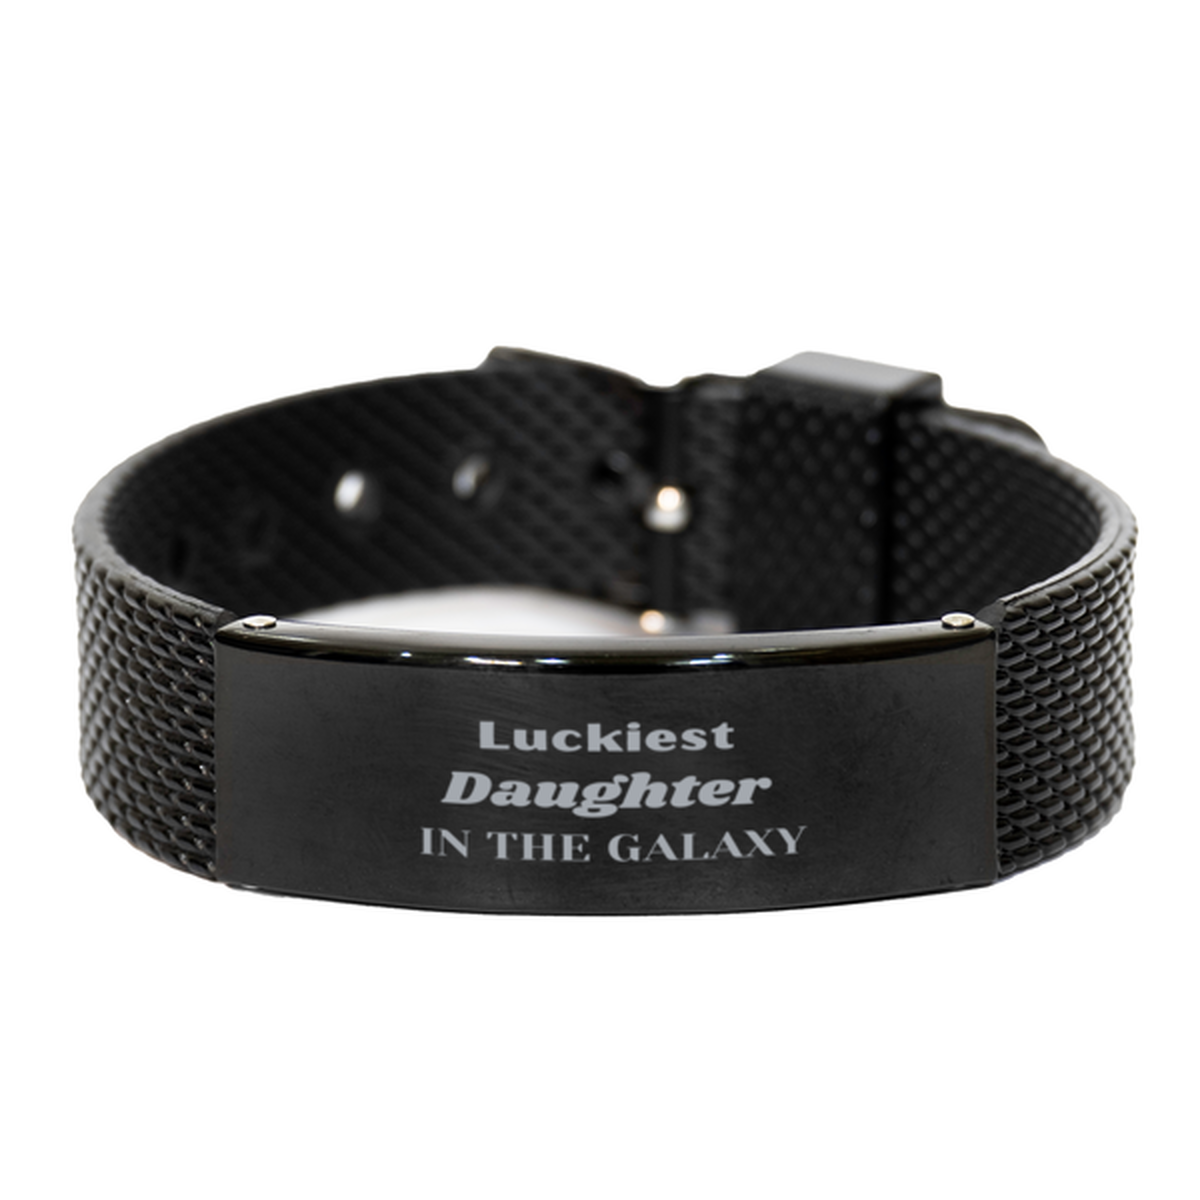 Luckiest Daughter in the Galaxy, To My Daughter Engraved Gifts, Christmas Daughter Black Shark Mesh Bracelet Gifts, X-mas Birthday Unique Gifts For Daughter Men Women